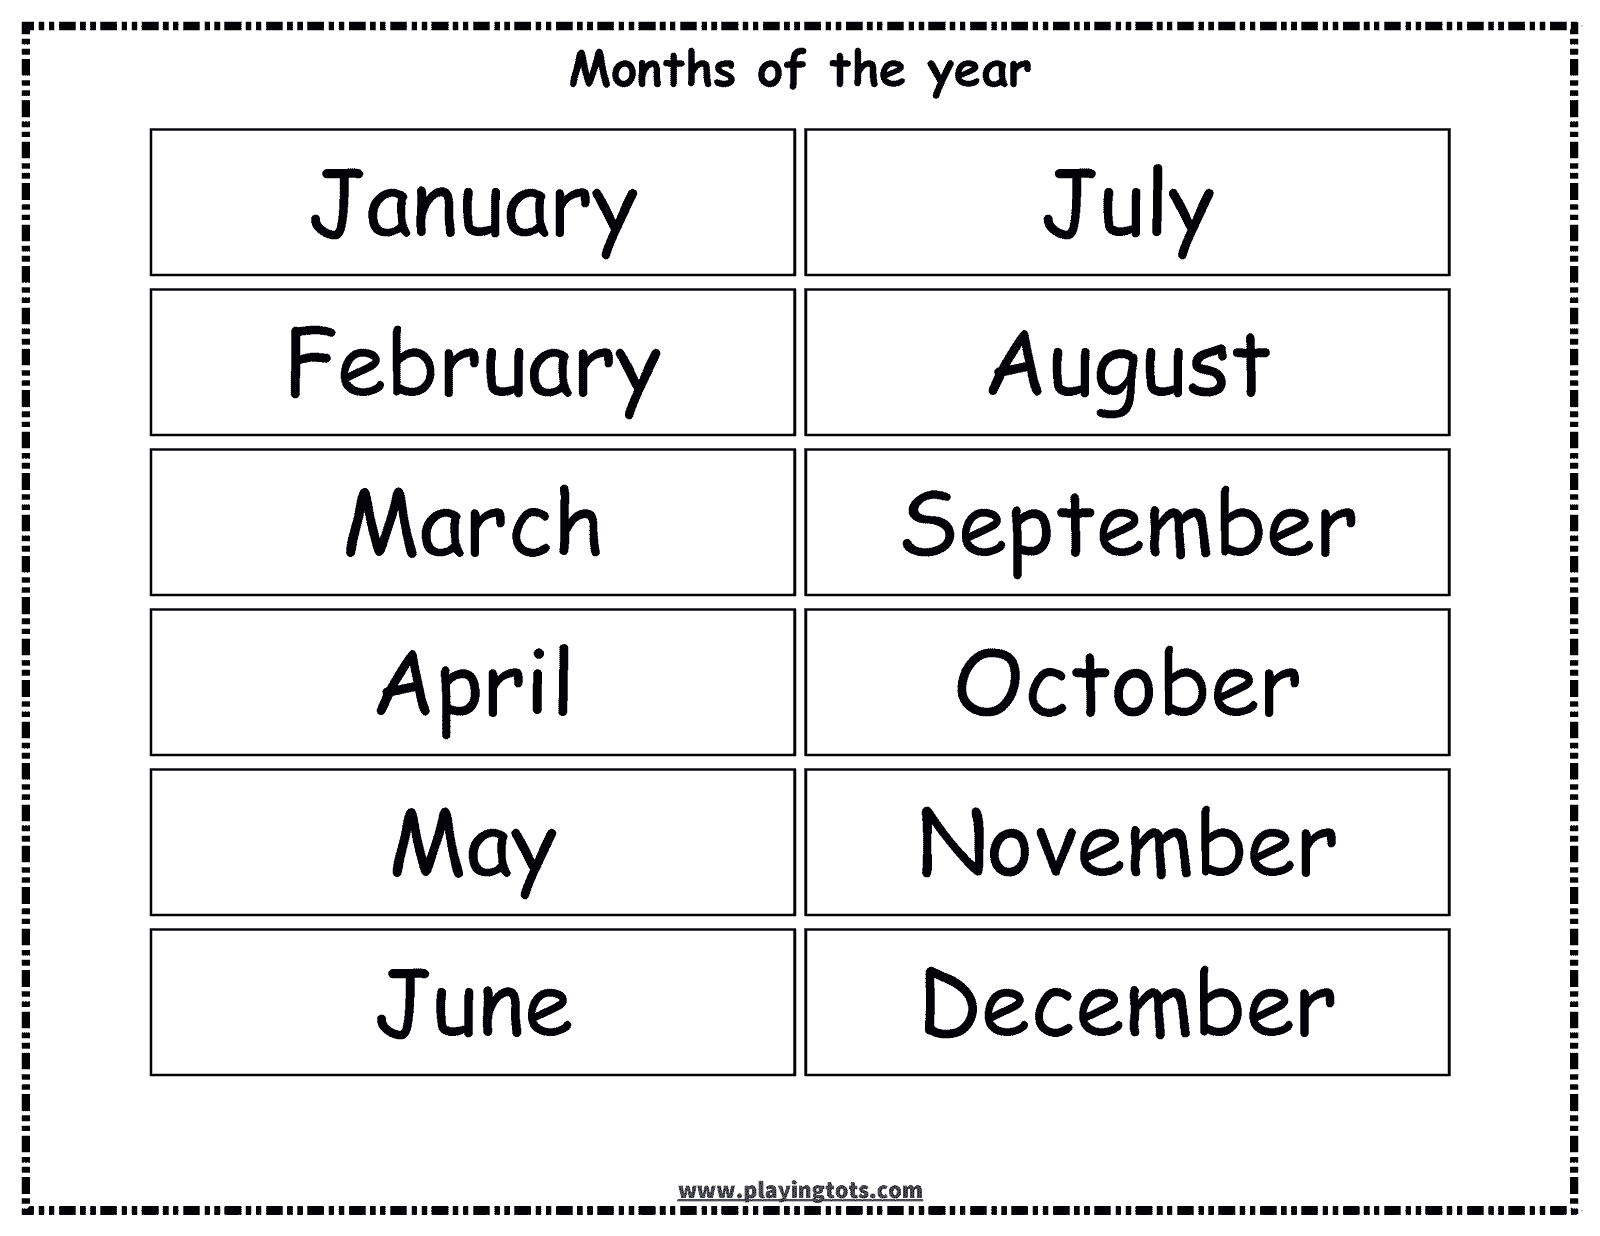 months-of-the-year-printable-worksheets-worksheetscity